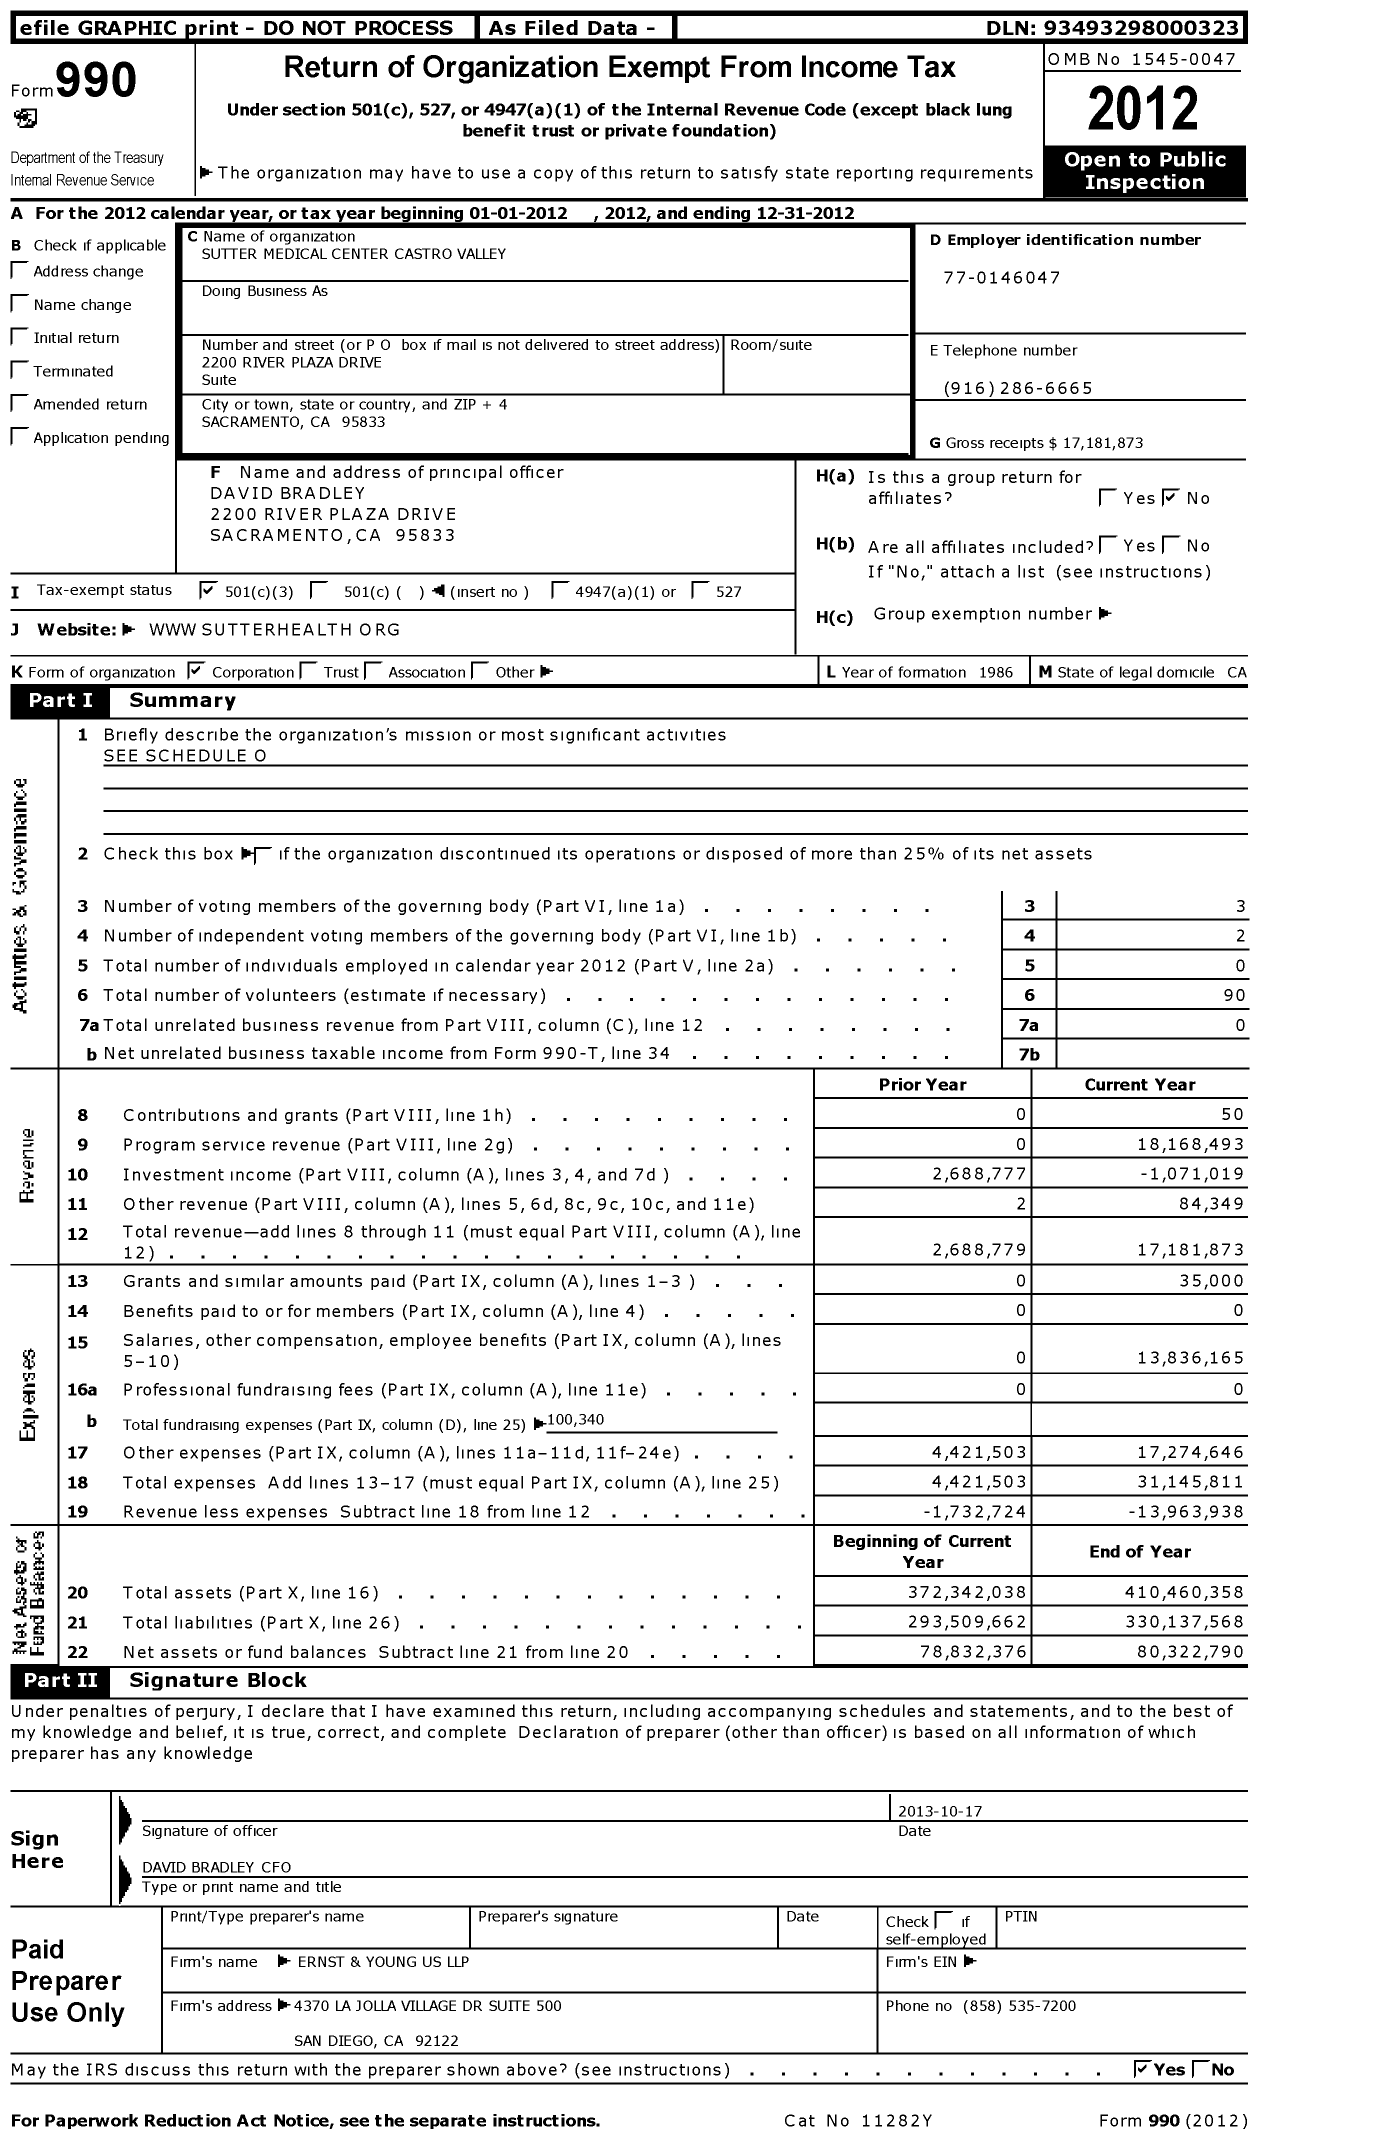 Image of first page of 2012 Form 990 for Sutter Medical Center Castro Valley